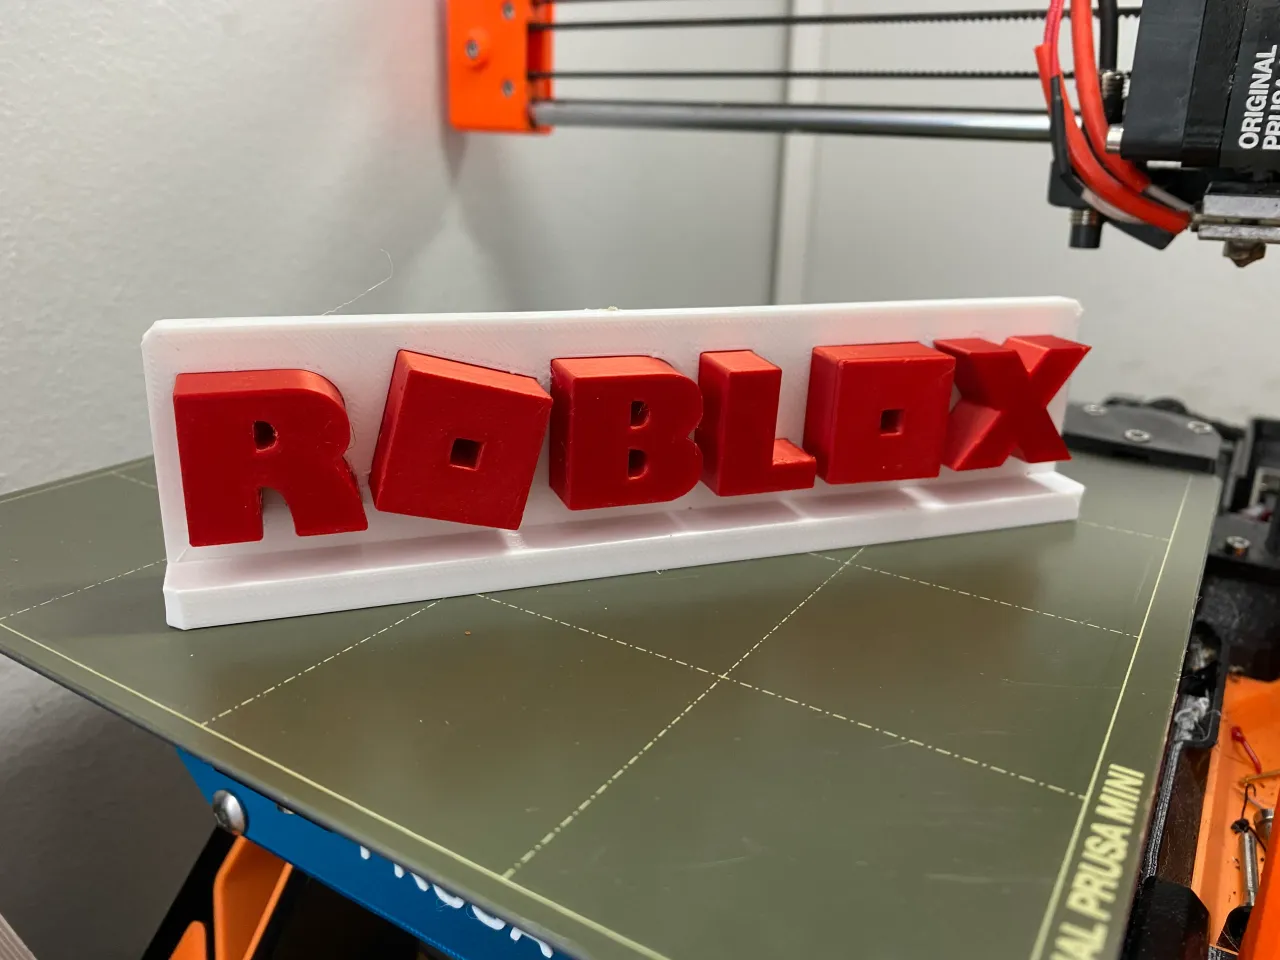 ROBLOX 3D Logo Stand, 3D Printed